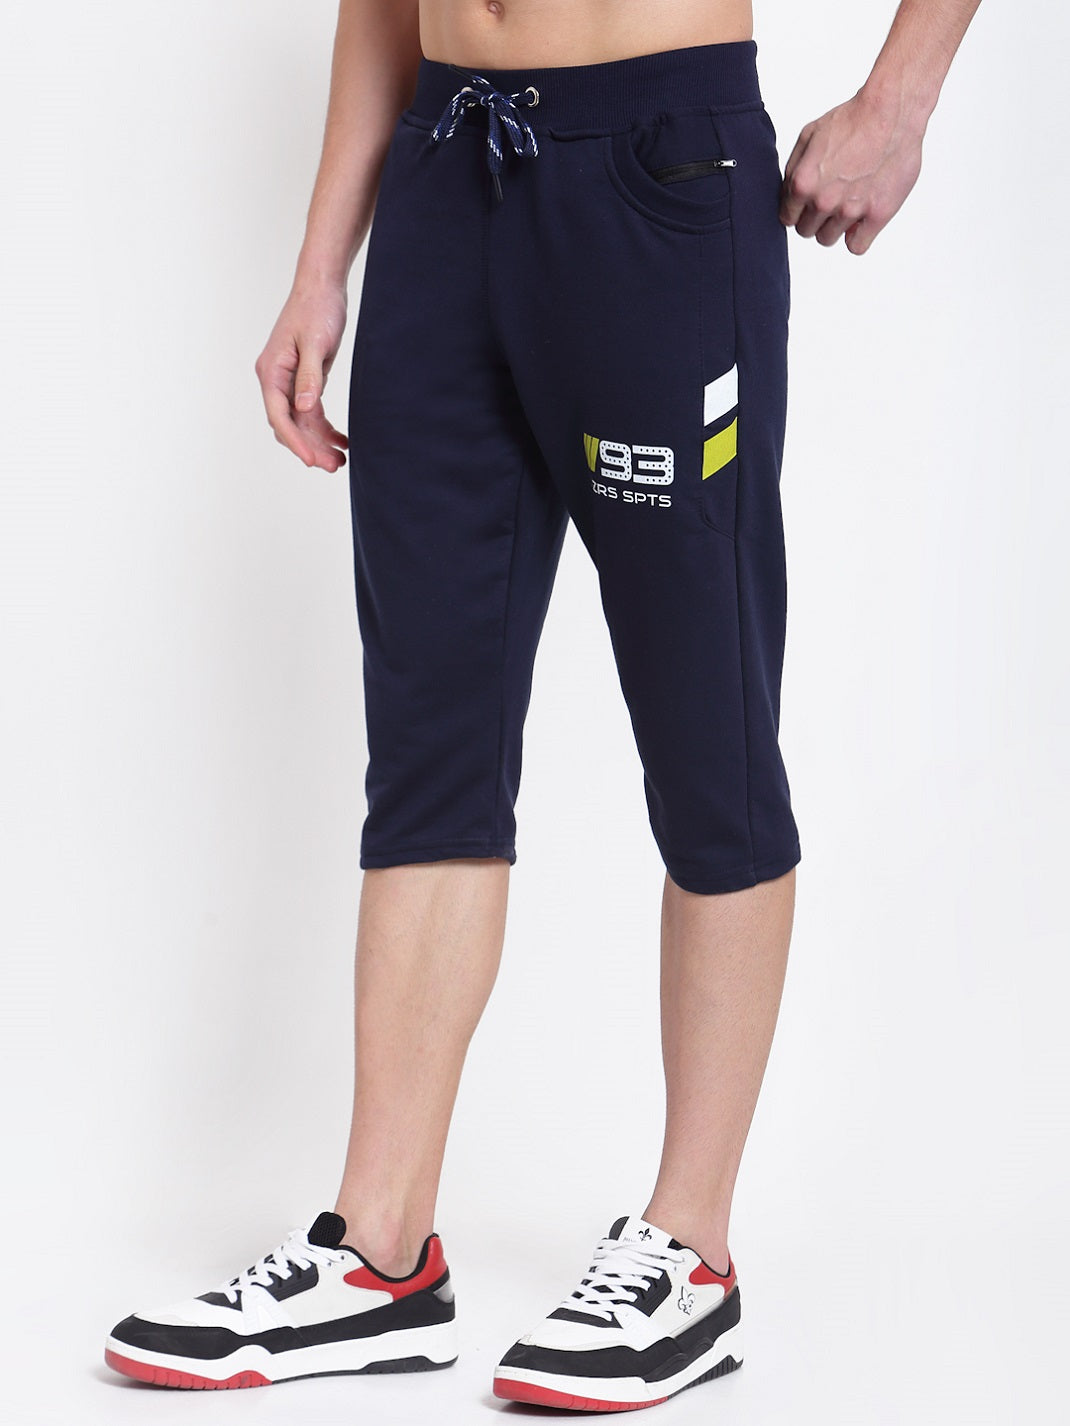 Men Shorts and Tights 3/4, Male Fashion Outdoor Sports Multi-Pocket  Overalls Pants Trousers: Buy Online at Best Price in UAE - Amazon.ae